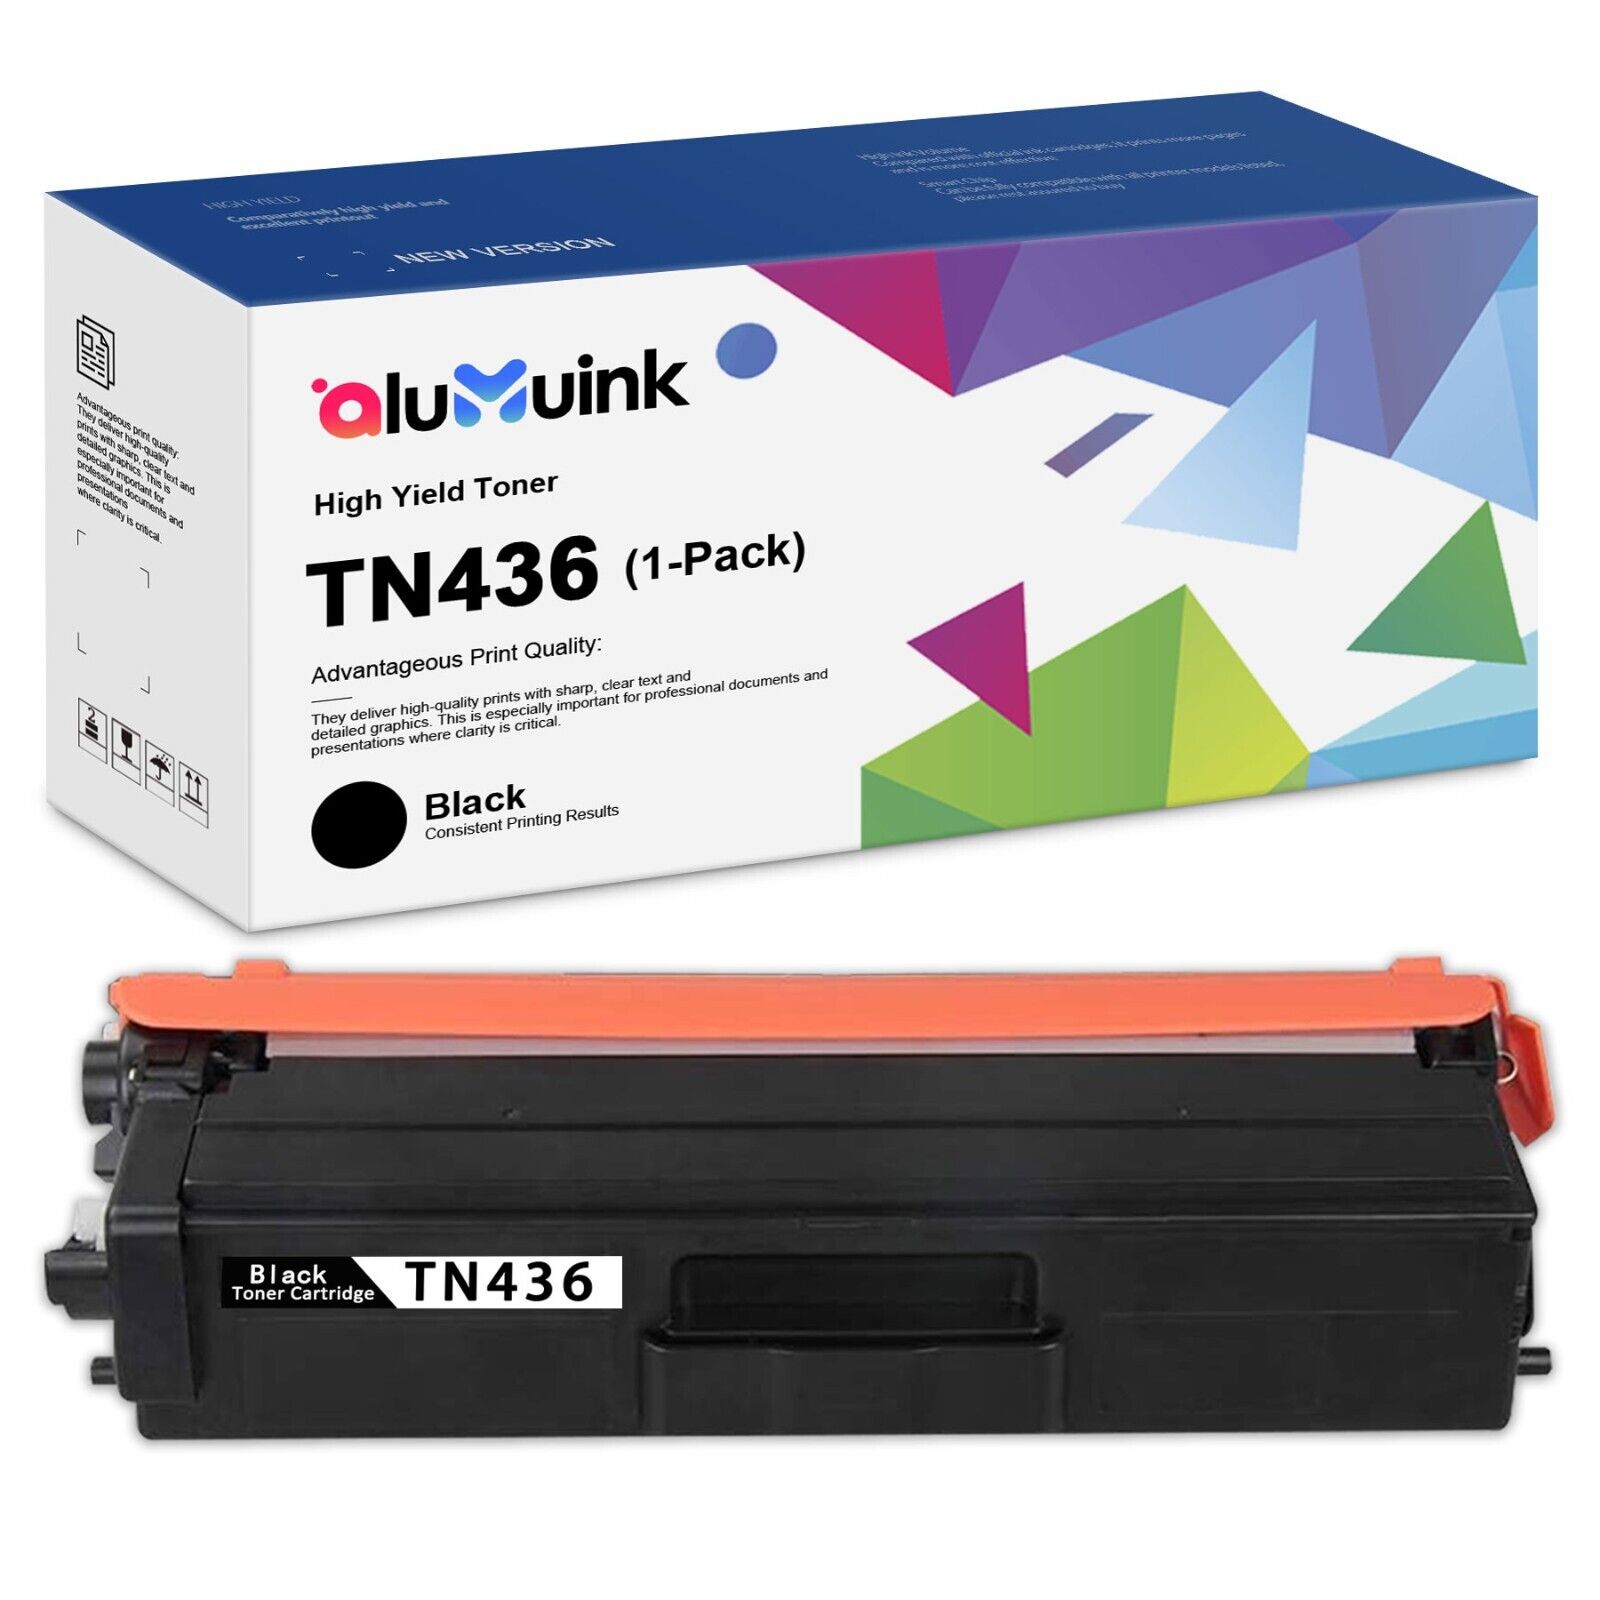 High Yield TN436 Black Toner Replacement for Brother TN436 HL-L8360CDW, 1PK